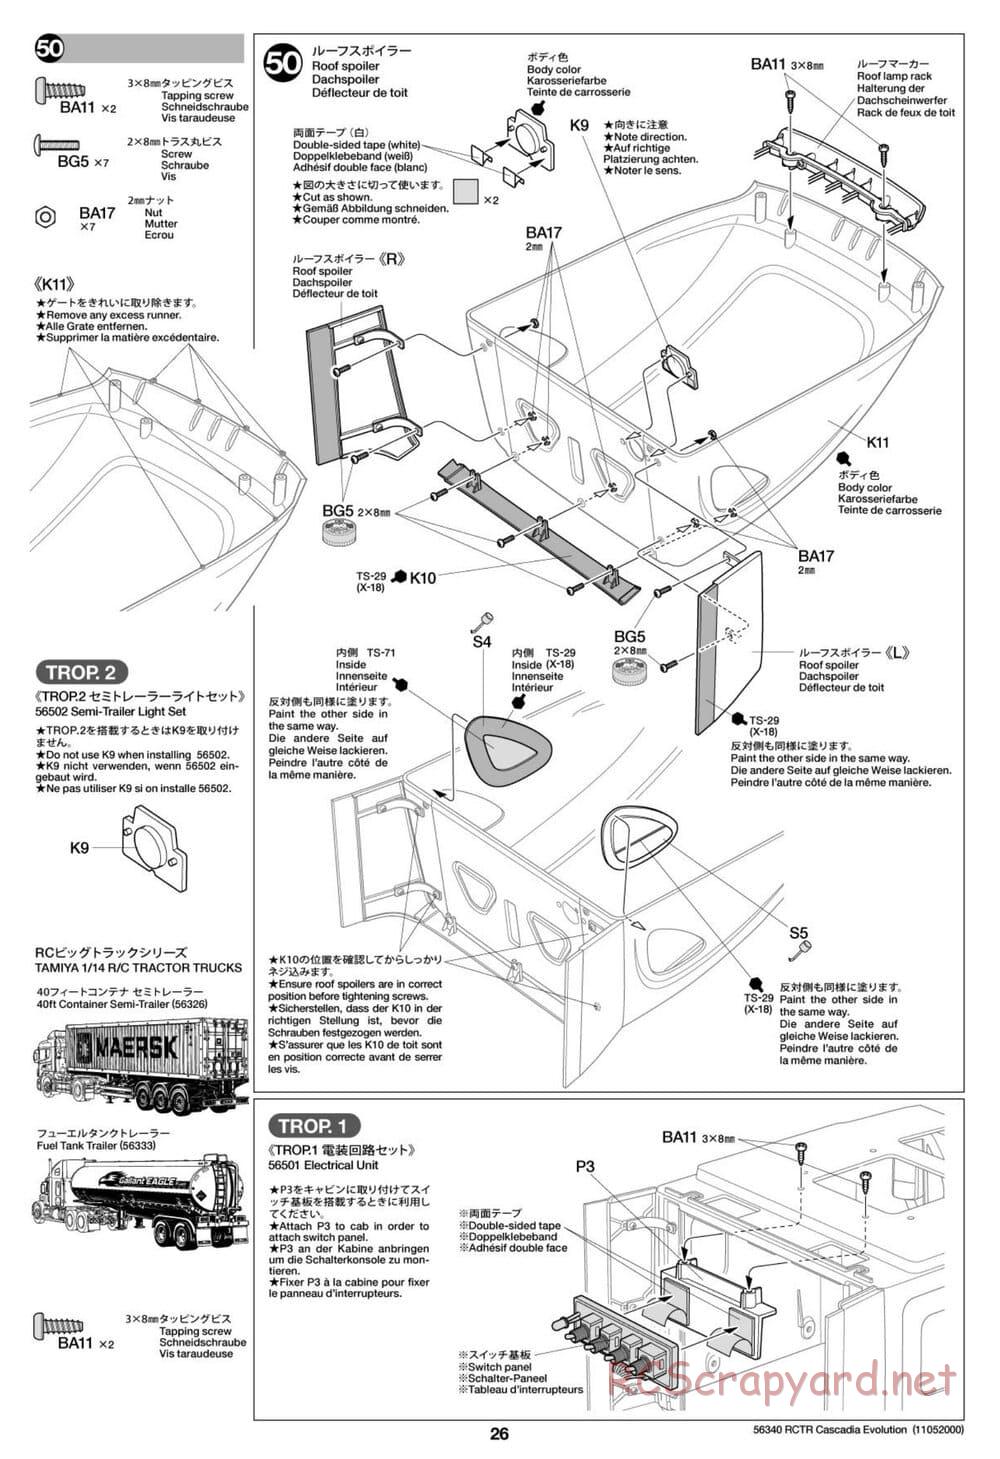 Tamiya - Freightliner Cascadia Evolution Tractor Truck Chassis - Manual - Page 26